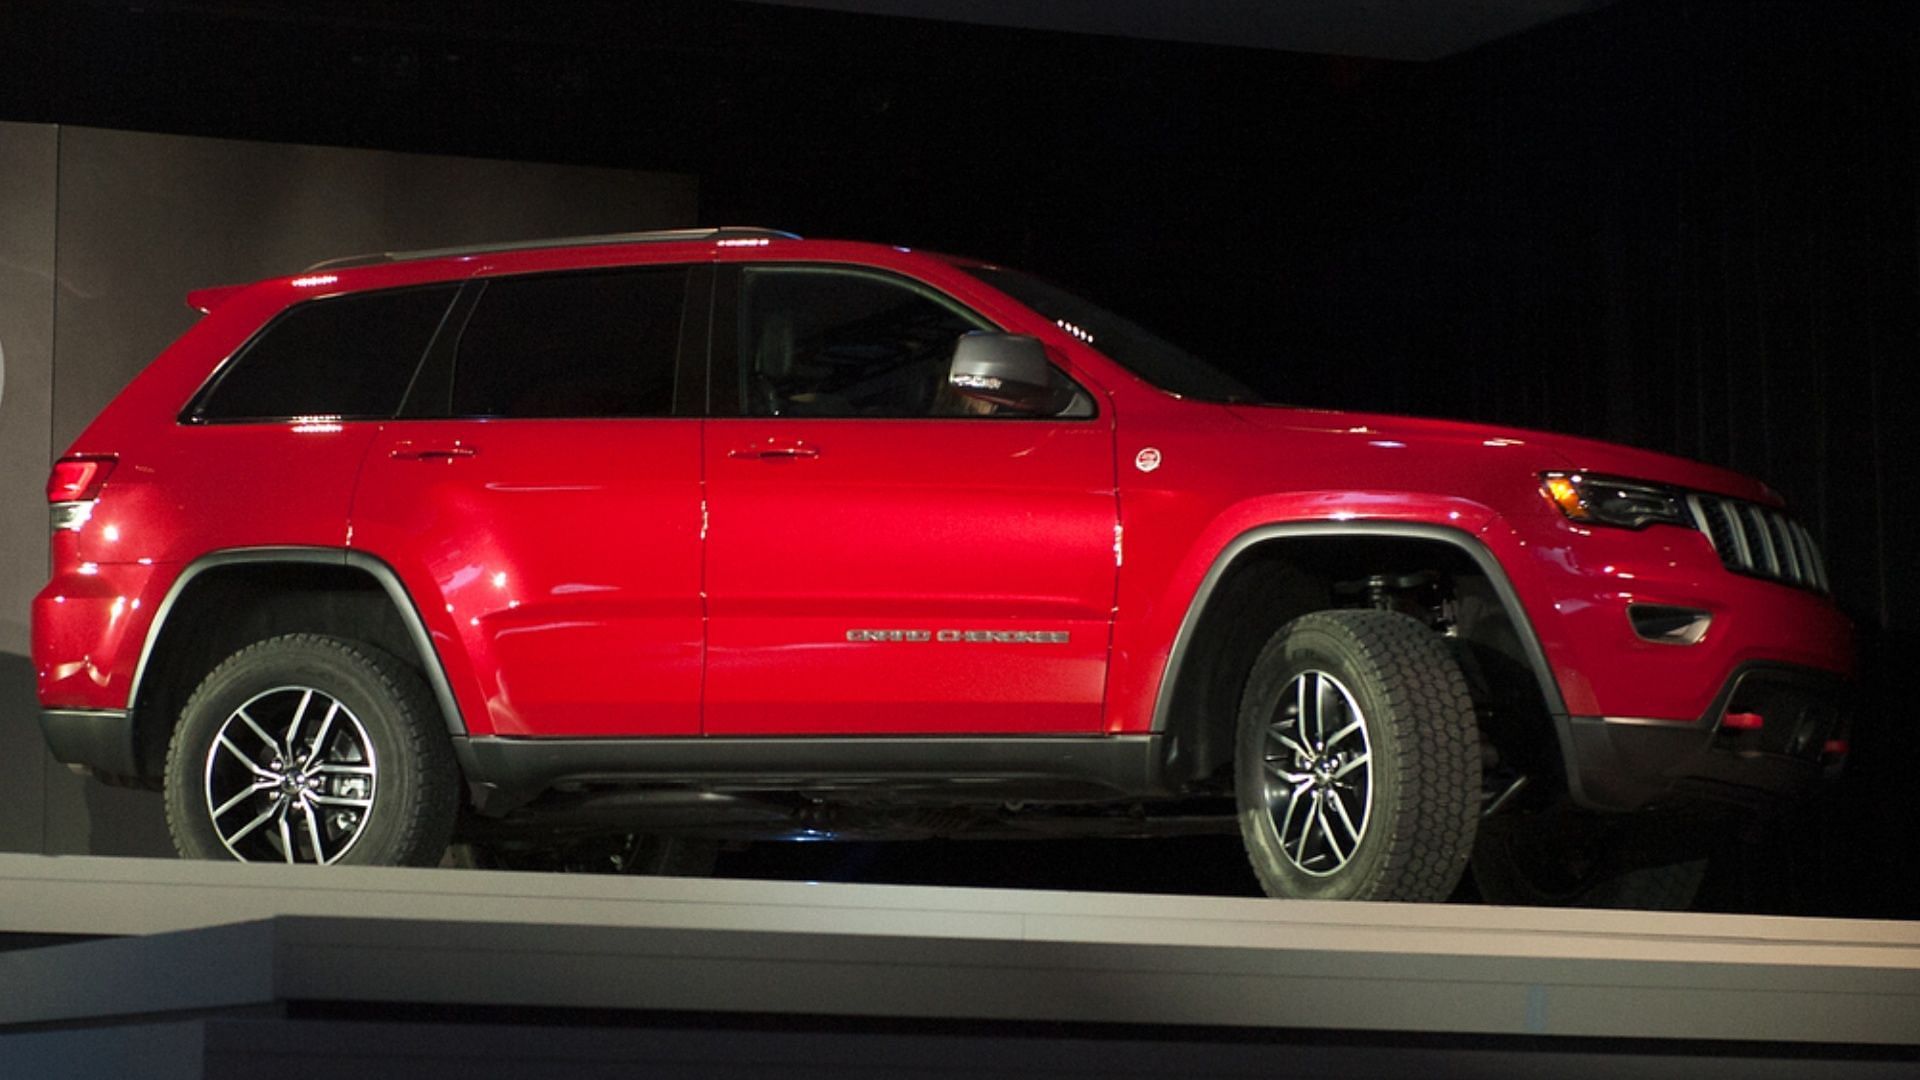 The recalled Jeep Grand Cherokee vehicles may pose accident and crash risks (Image via Bryan Thomas /Getty Images)